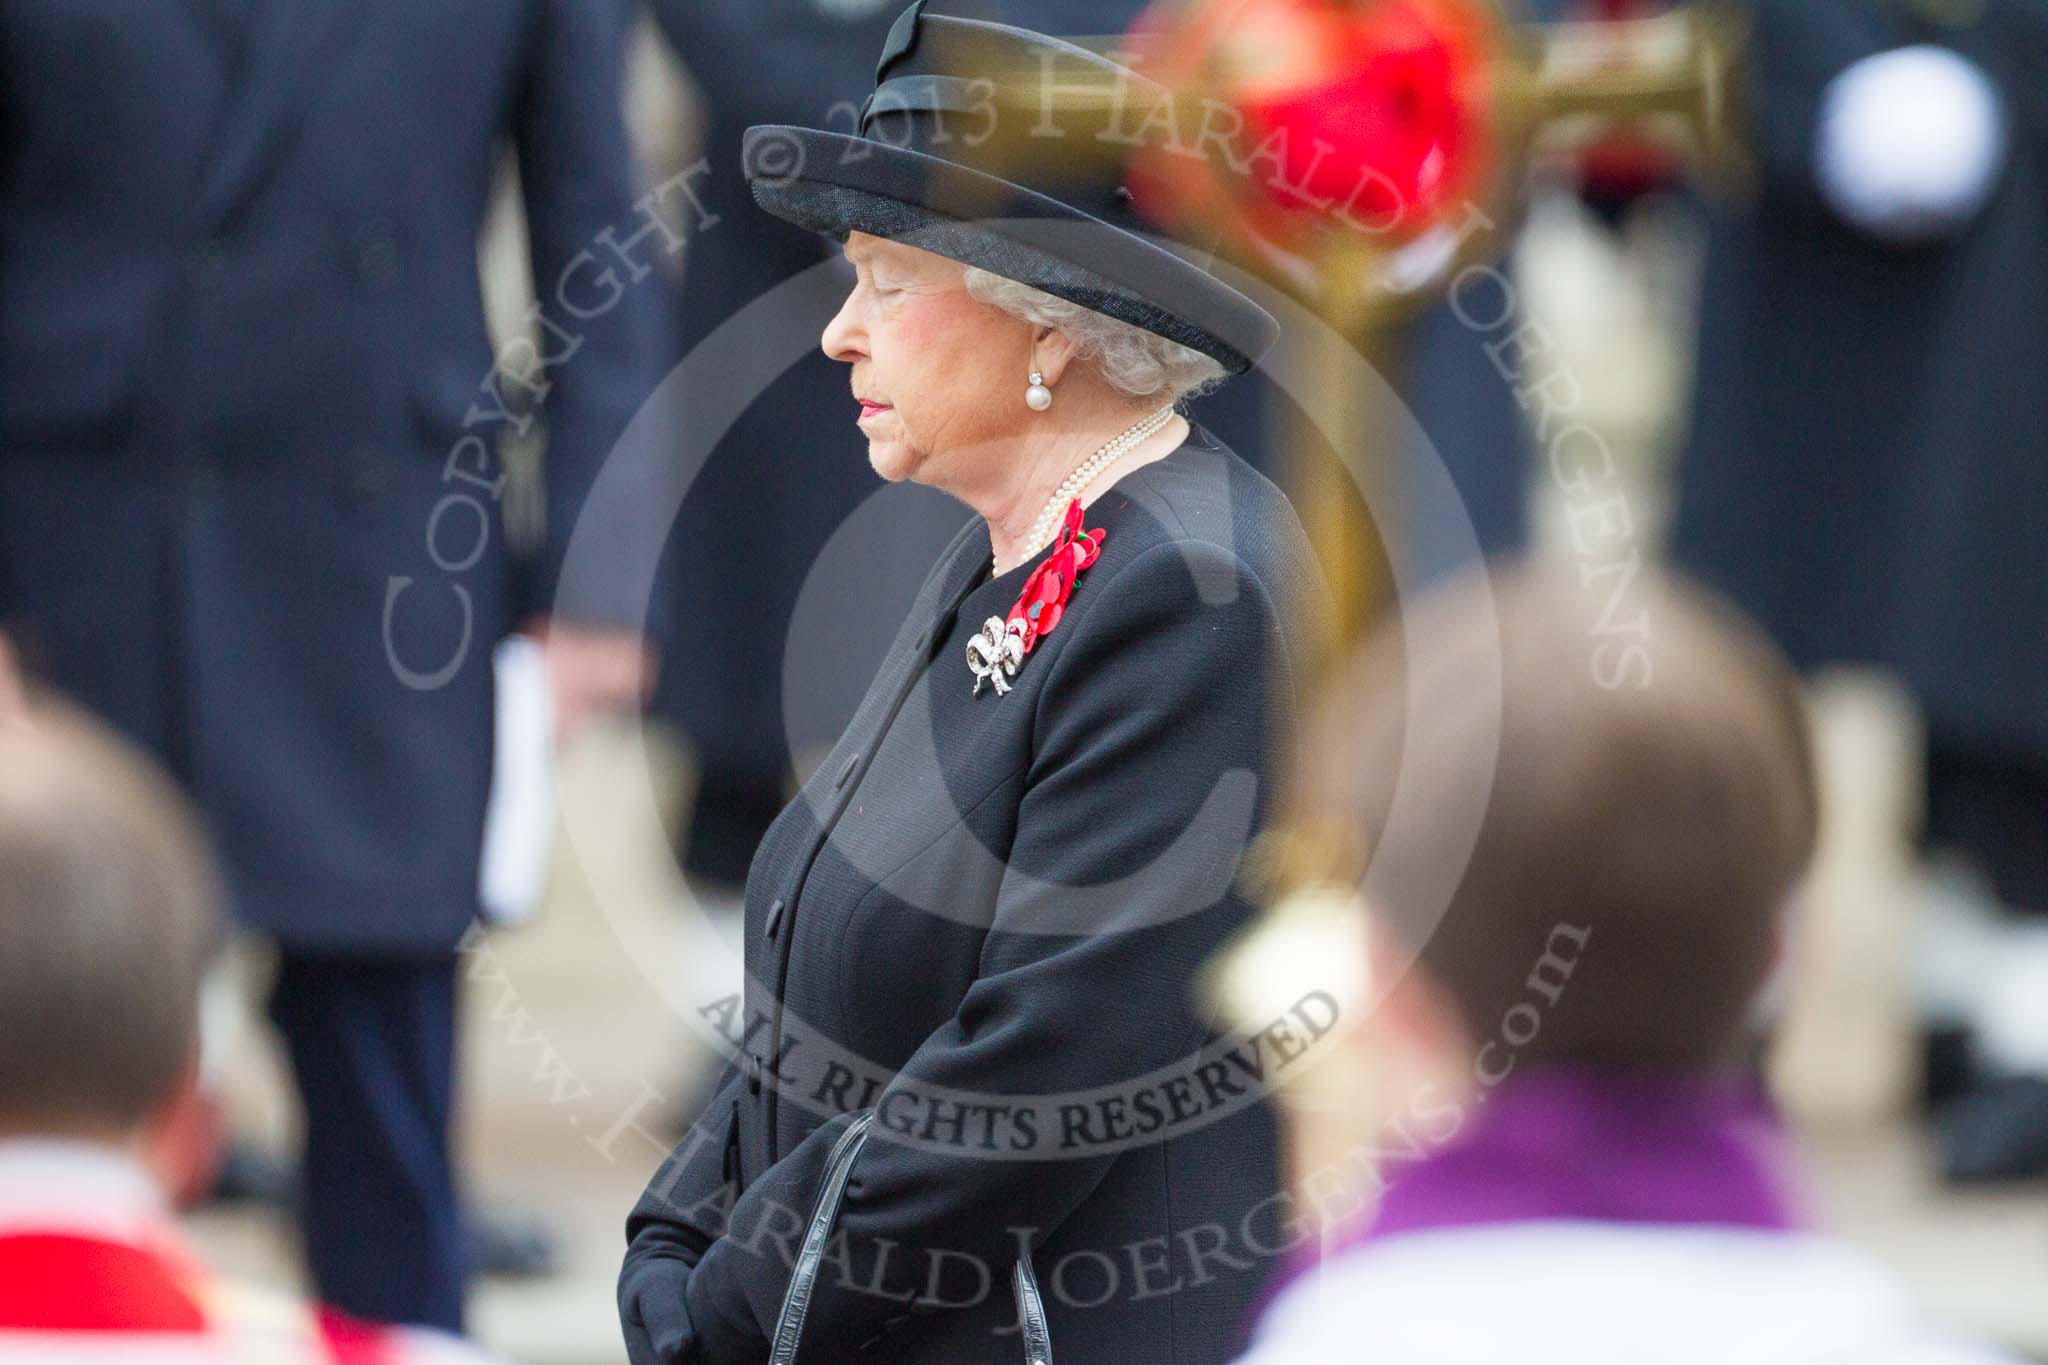 Remembrance Sunday at the Cenotaph 2015: HM The Queen during the service at the Cenotaph. Image #301, 08 November 2015 11:17 Whitehall, London, UK